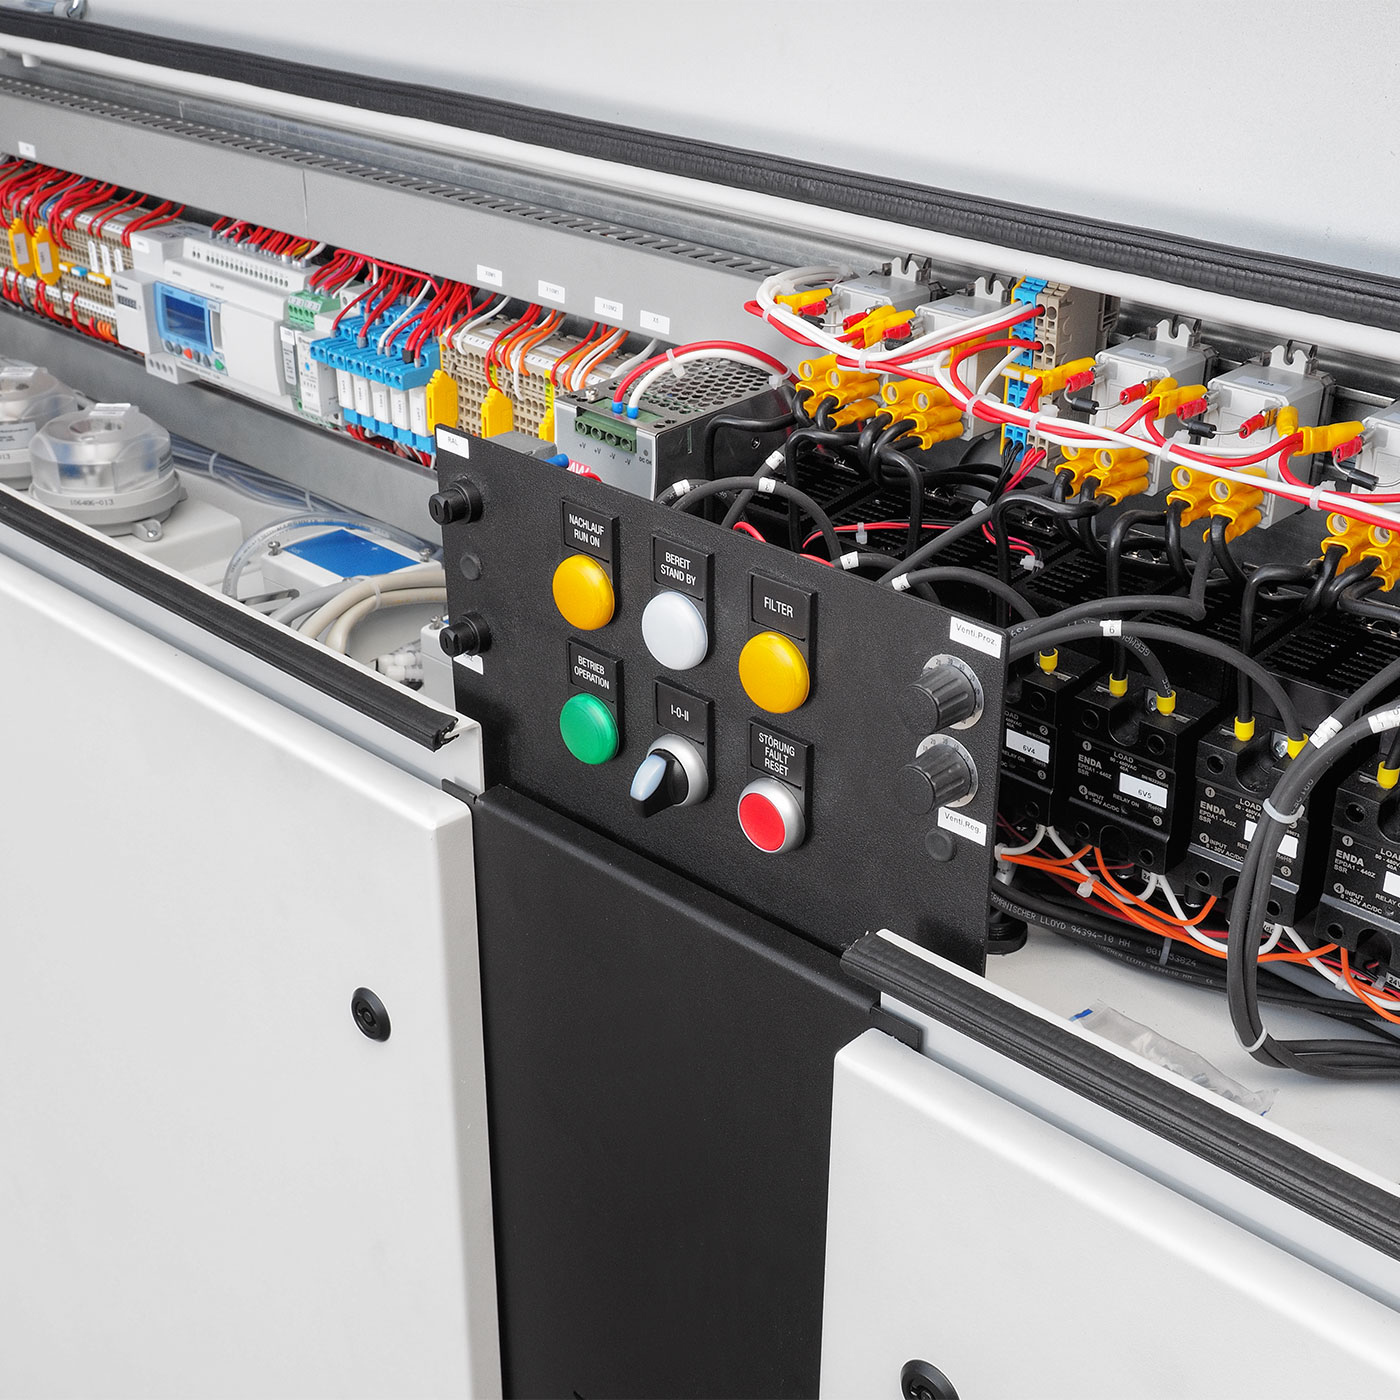 Integrated control cabinet with all the equipment and supplies required for operation